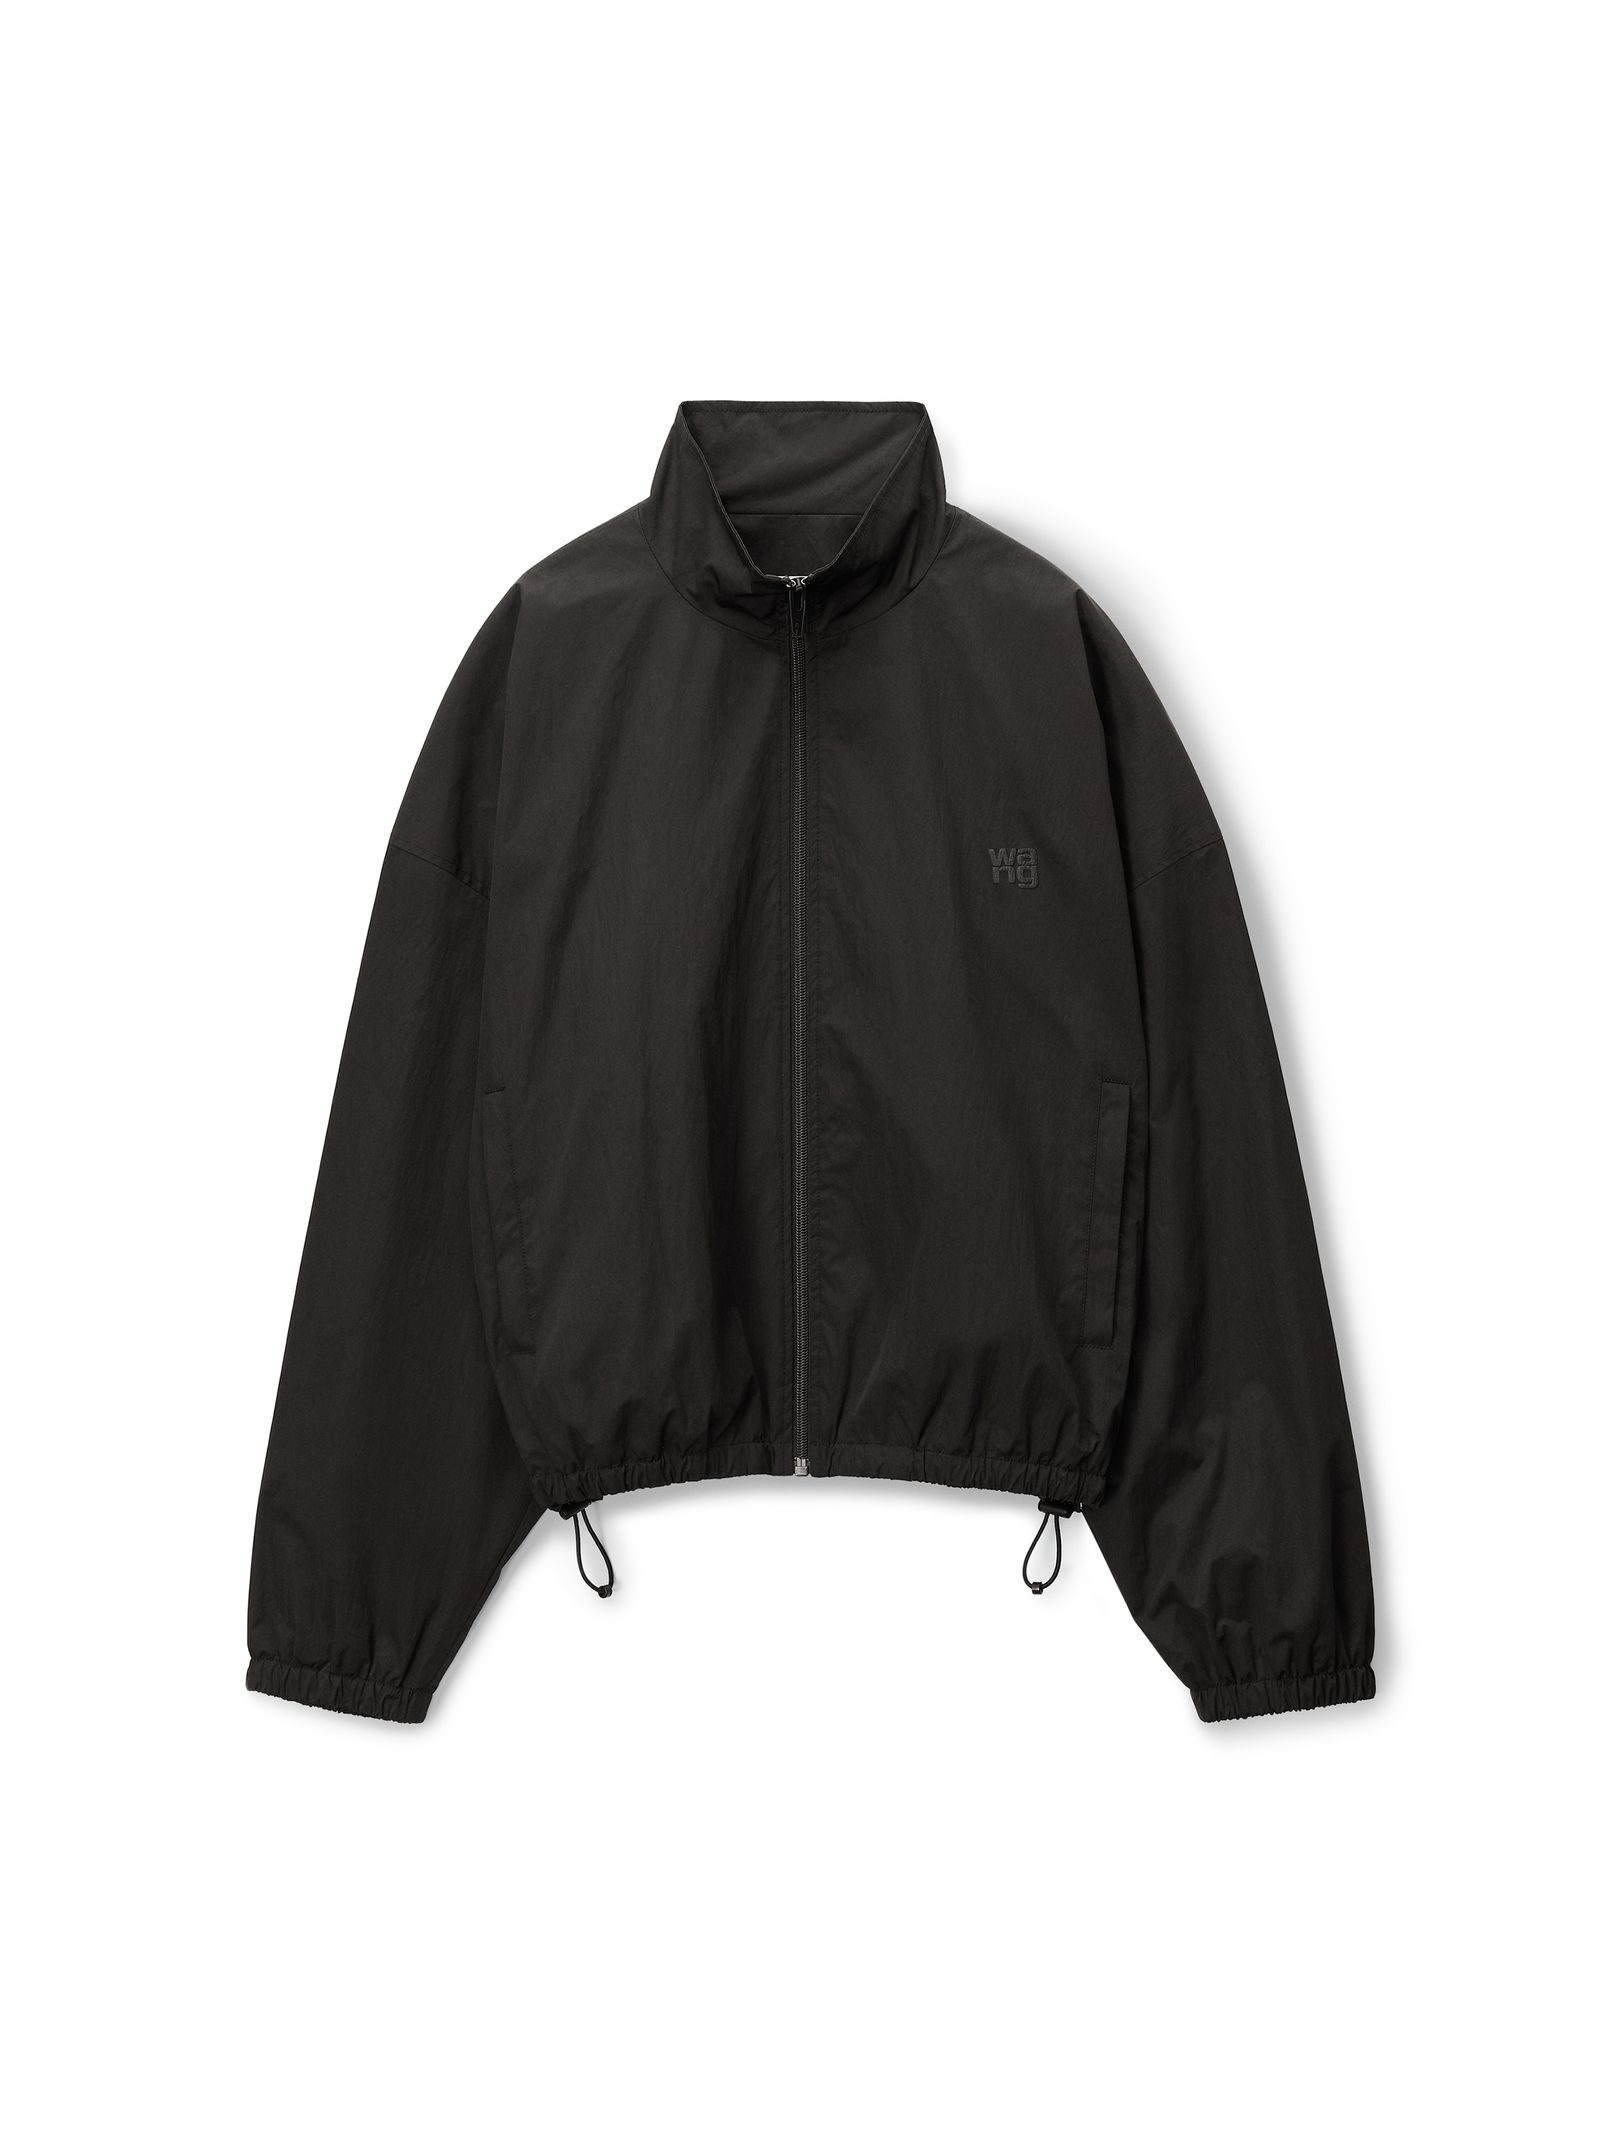 alexander wang - 【ラスト1点】COACHES TRACK JACKET WITH WANG PUFF 